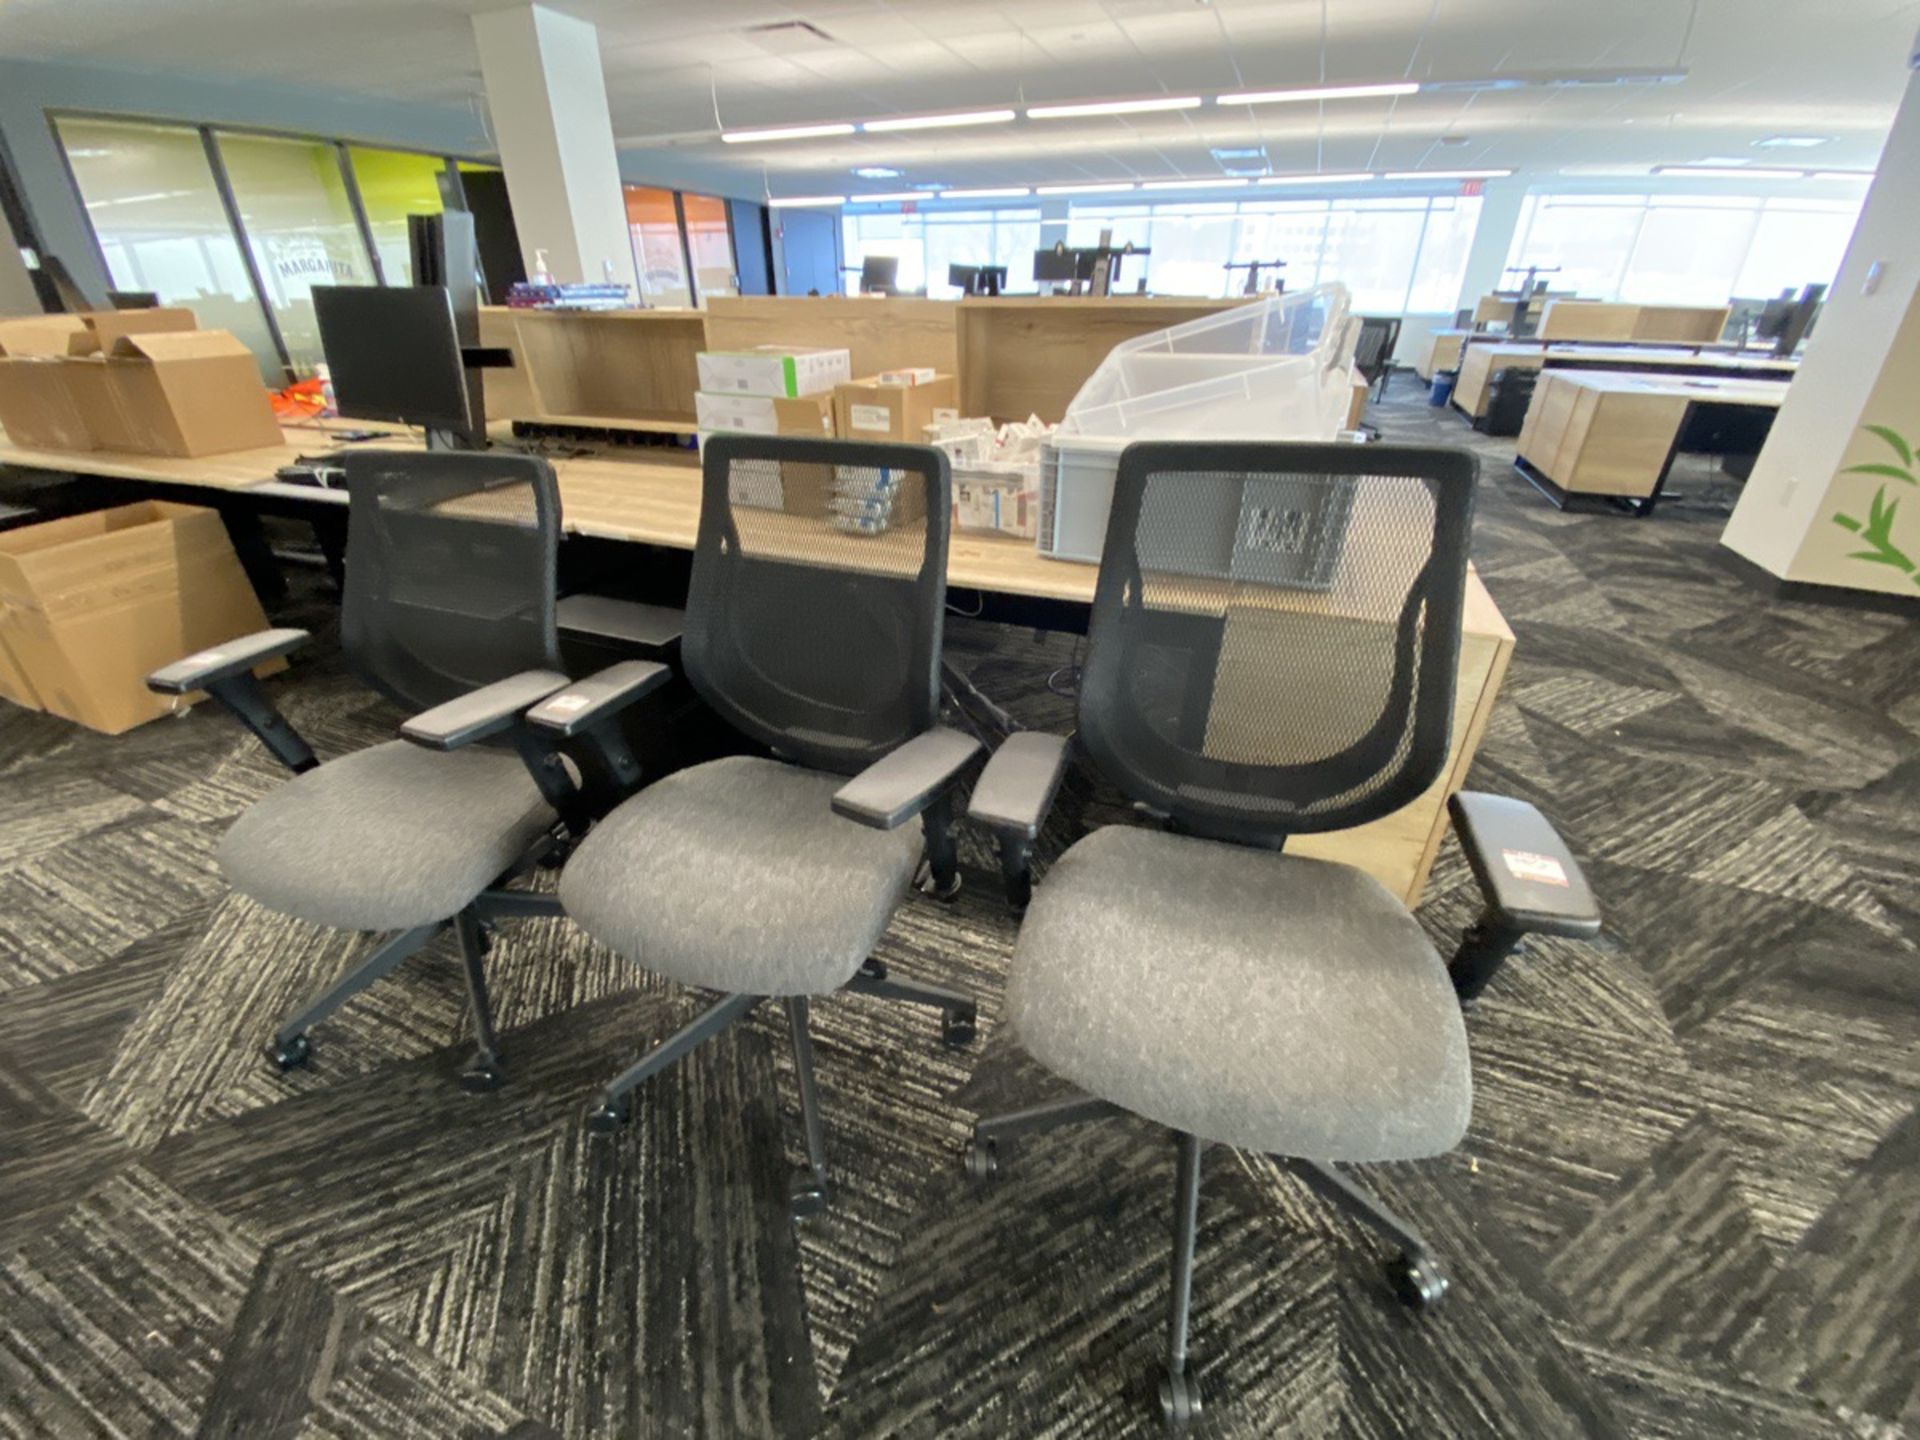 (3) Allseating Swivel Chairs